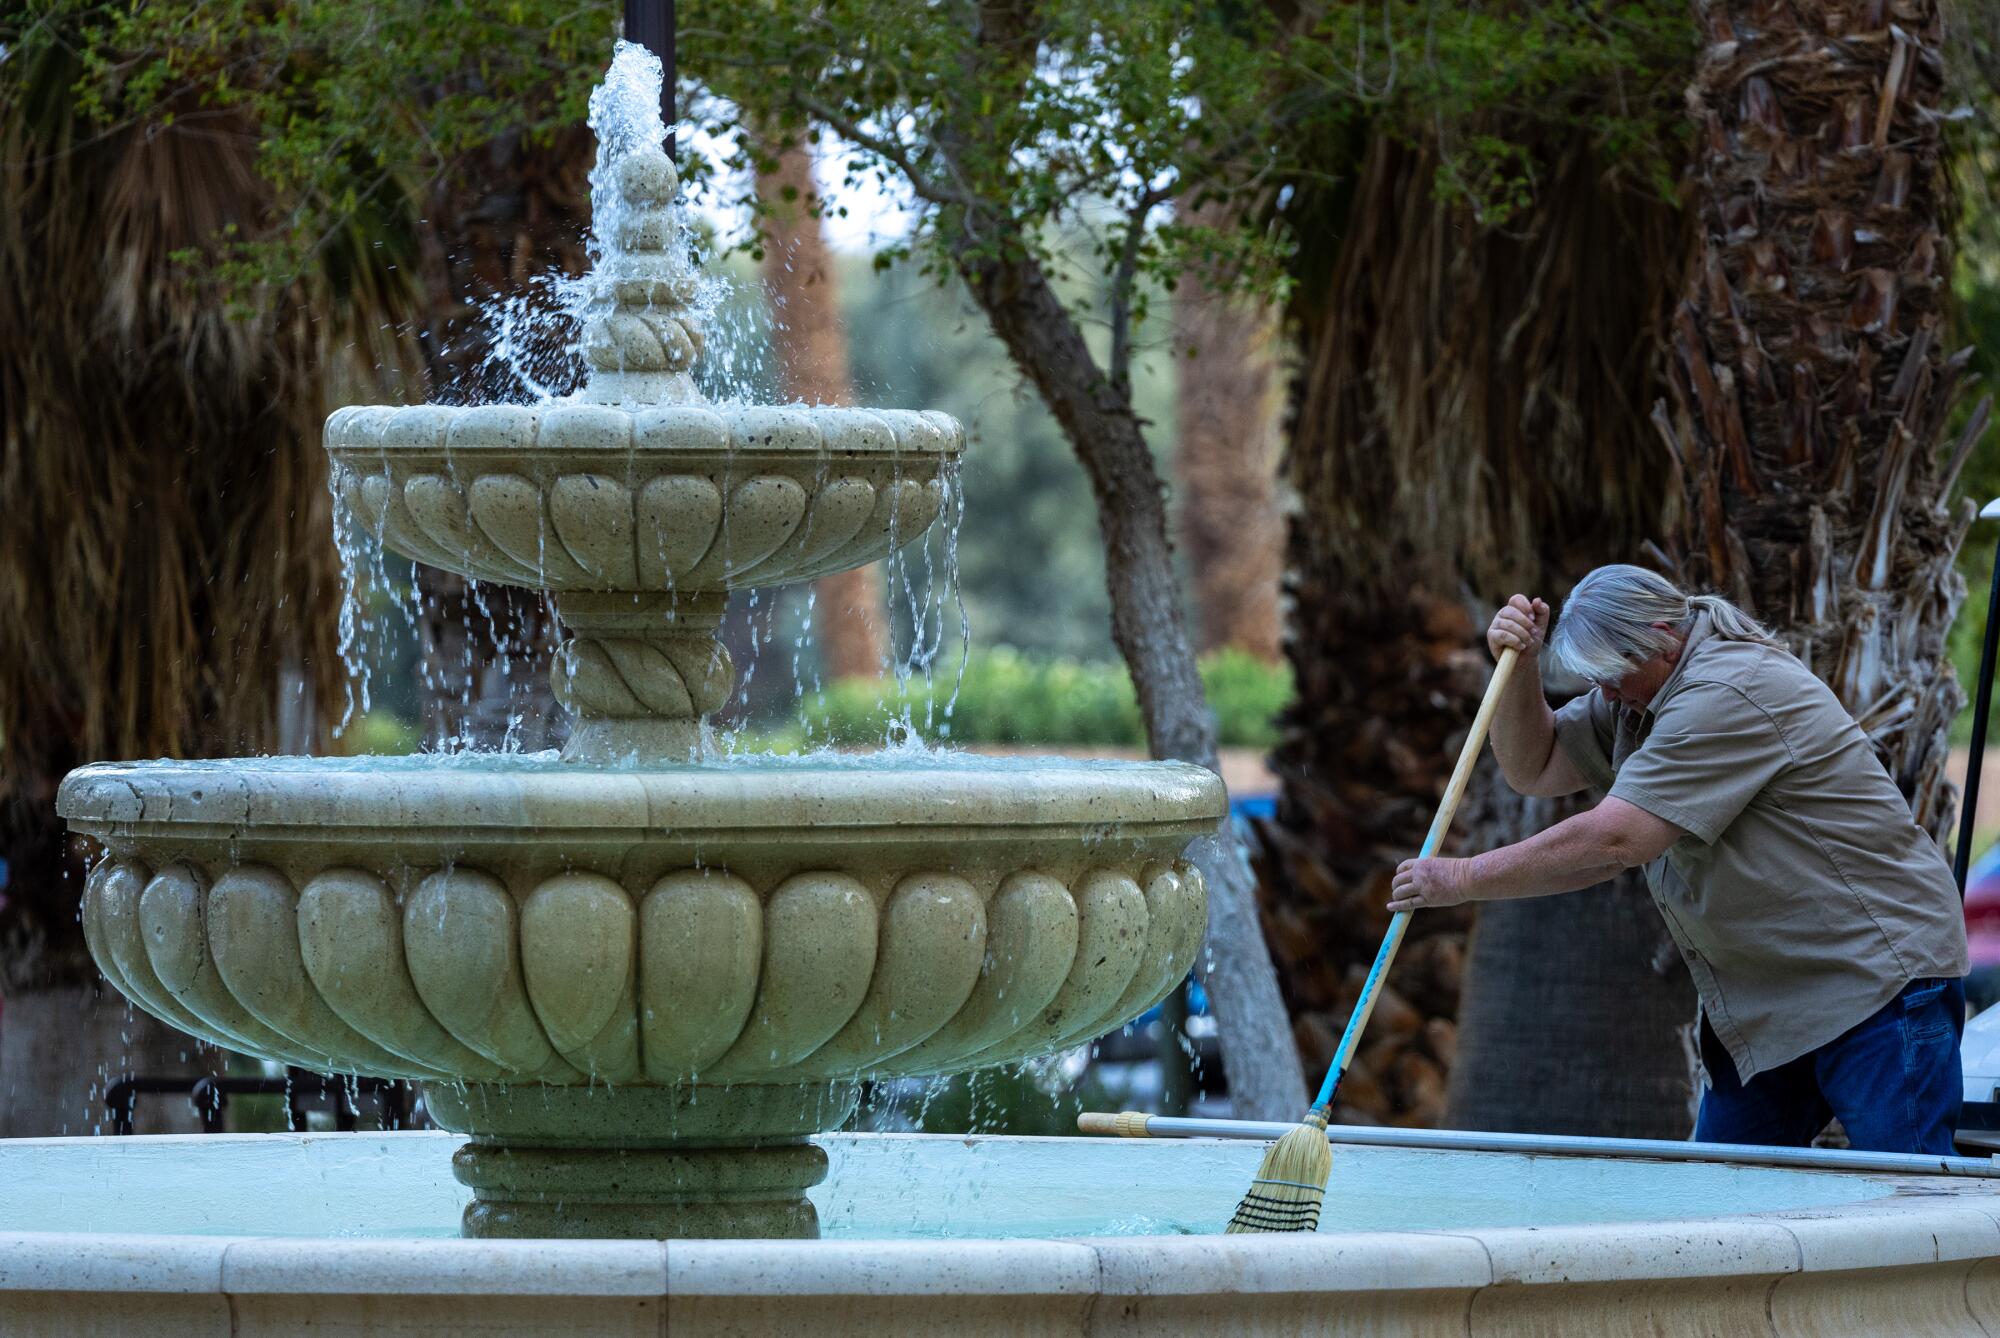 A worker uses a broom to clean a water fountain.